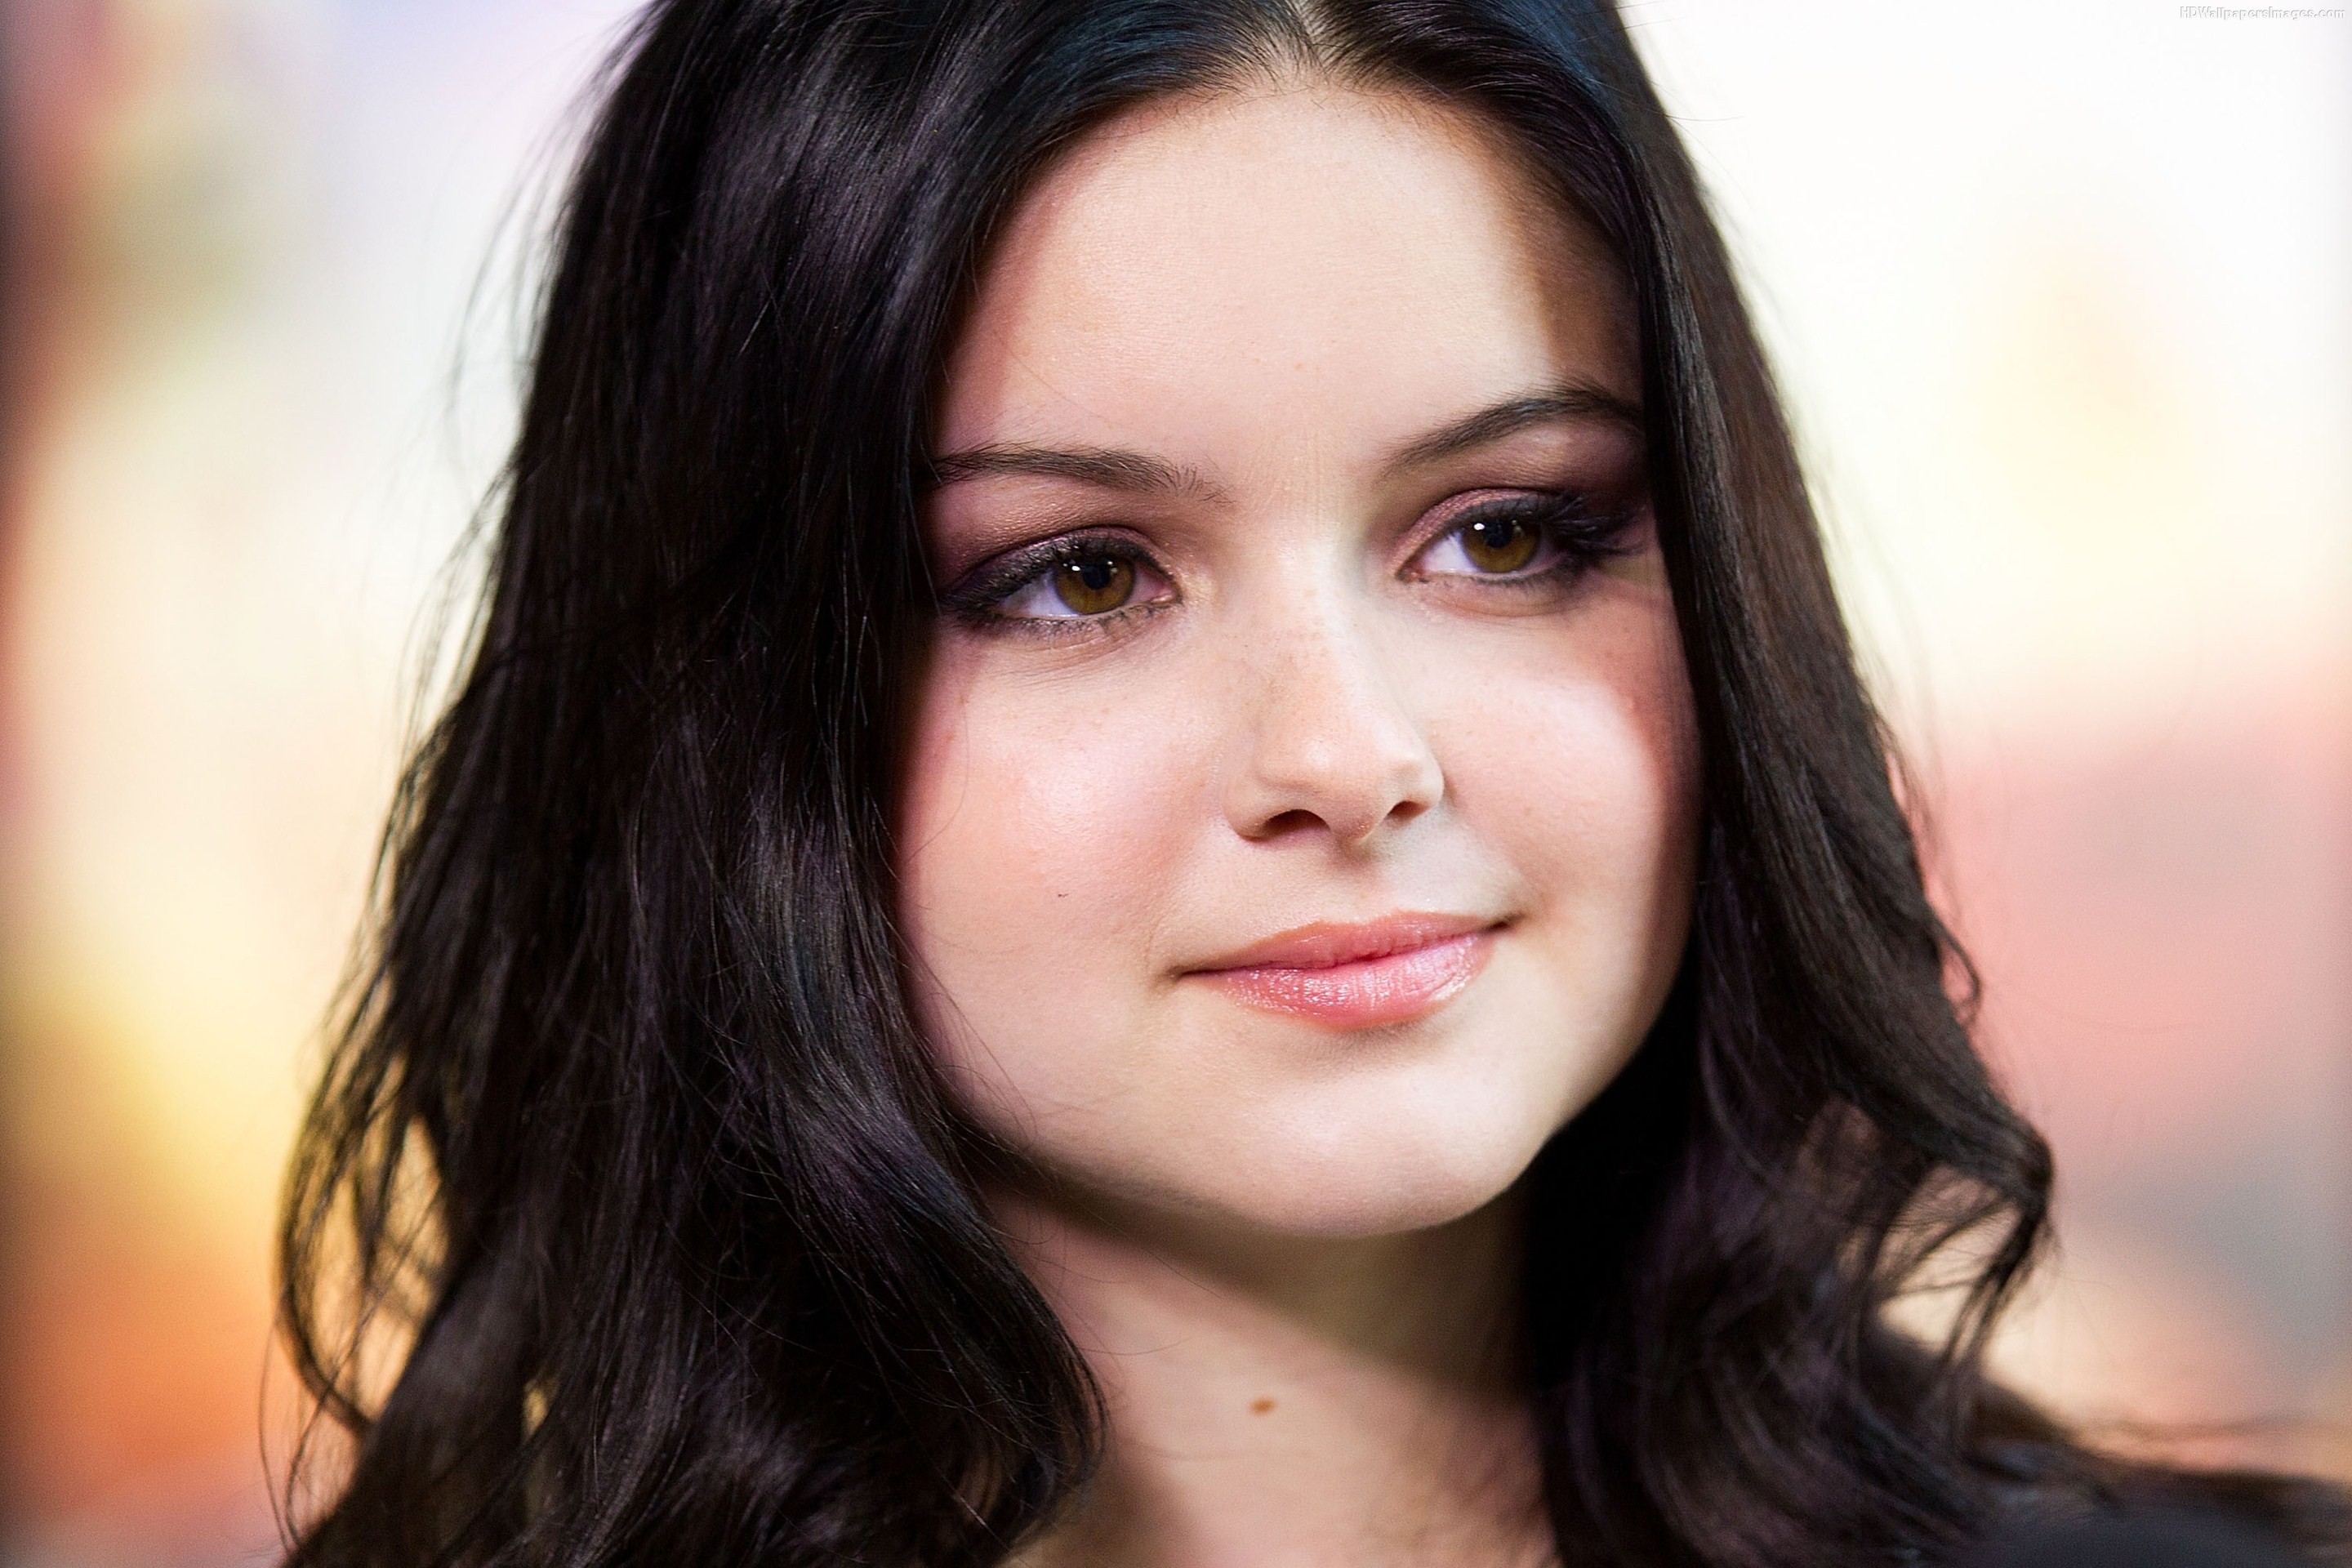 Ariel Winter Wallpapers High Quality Download Free